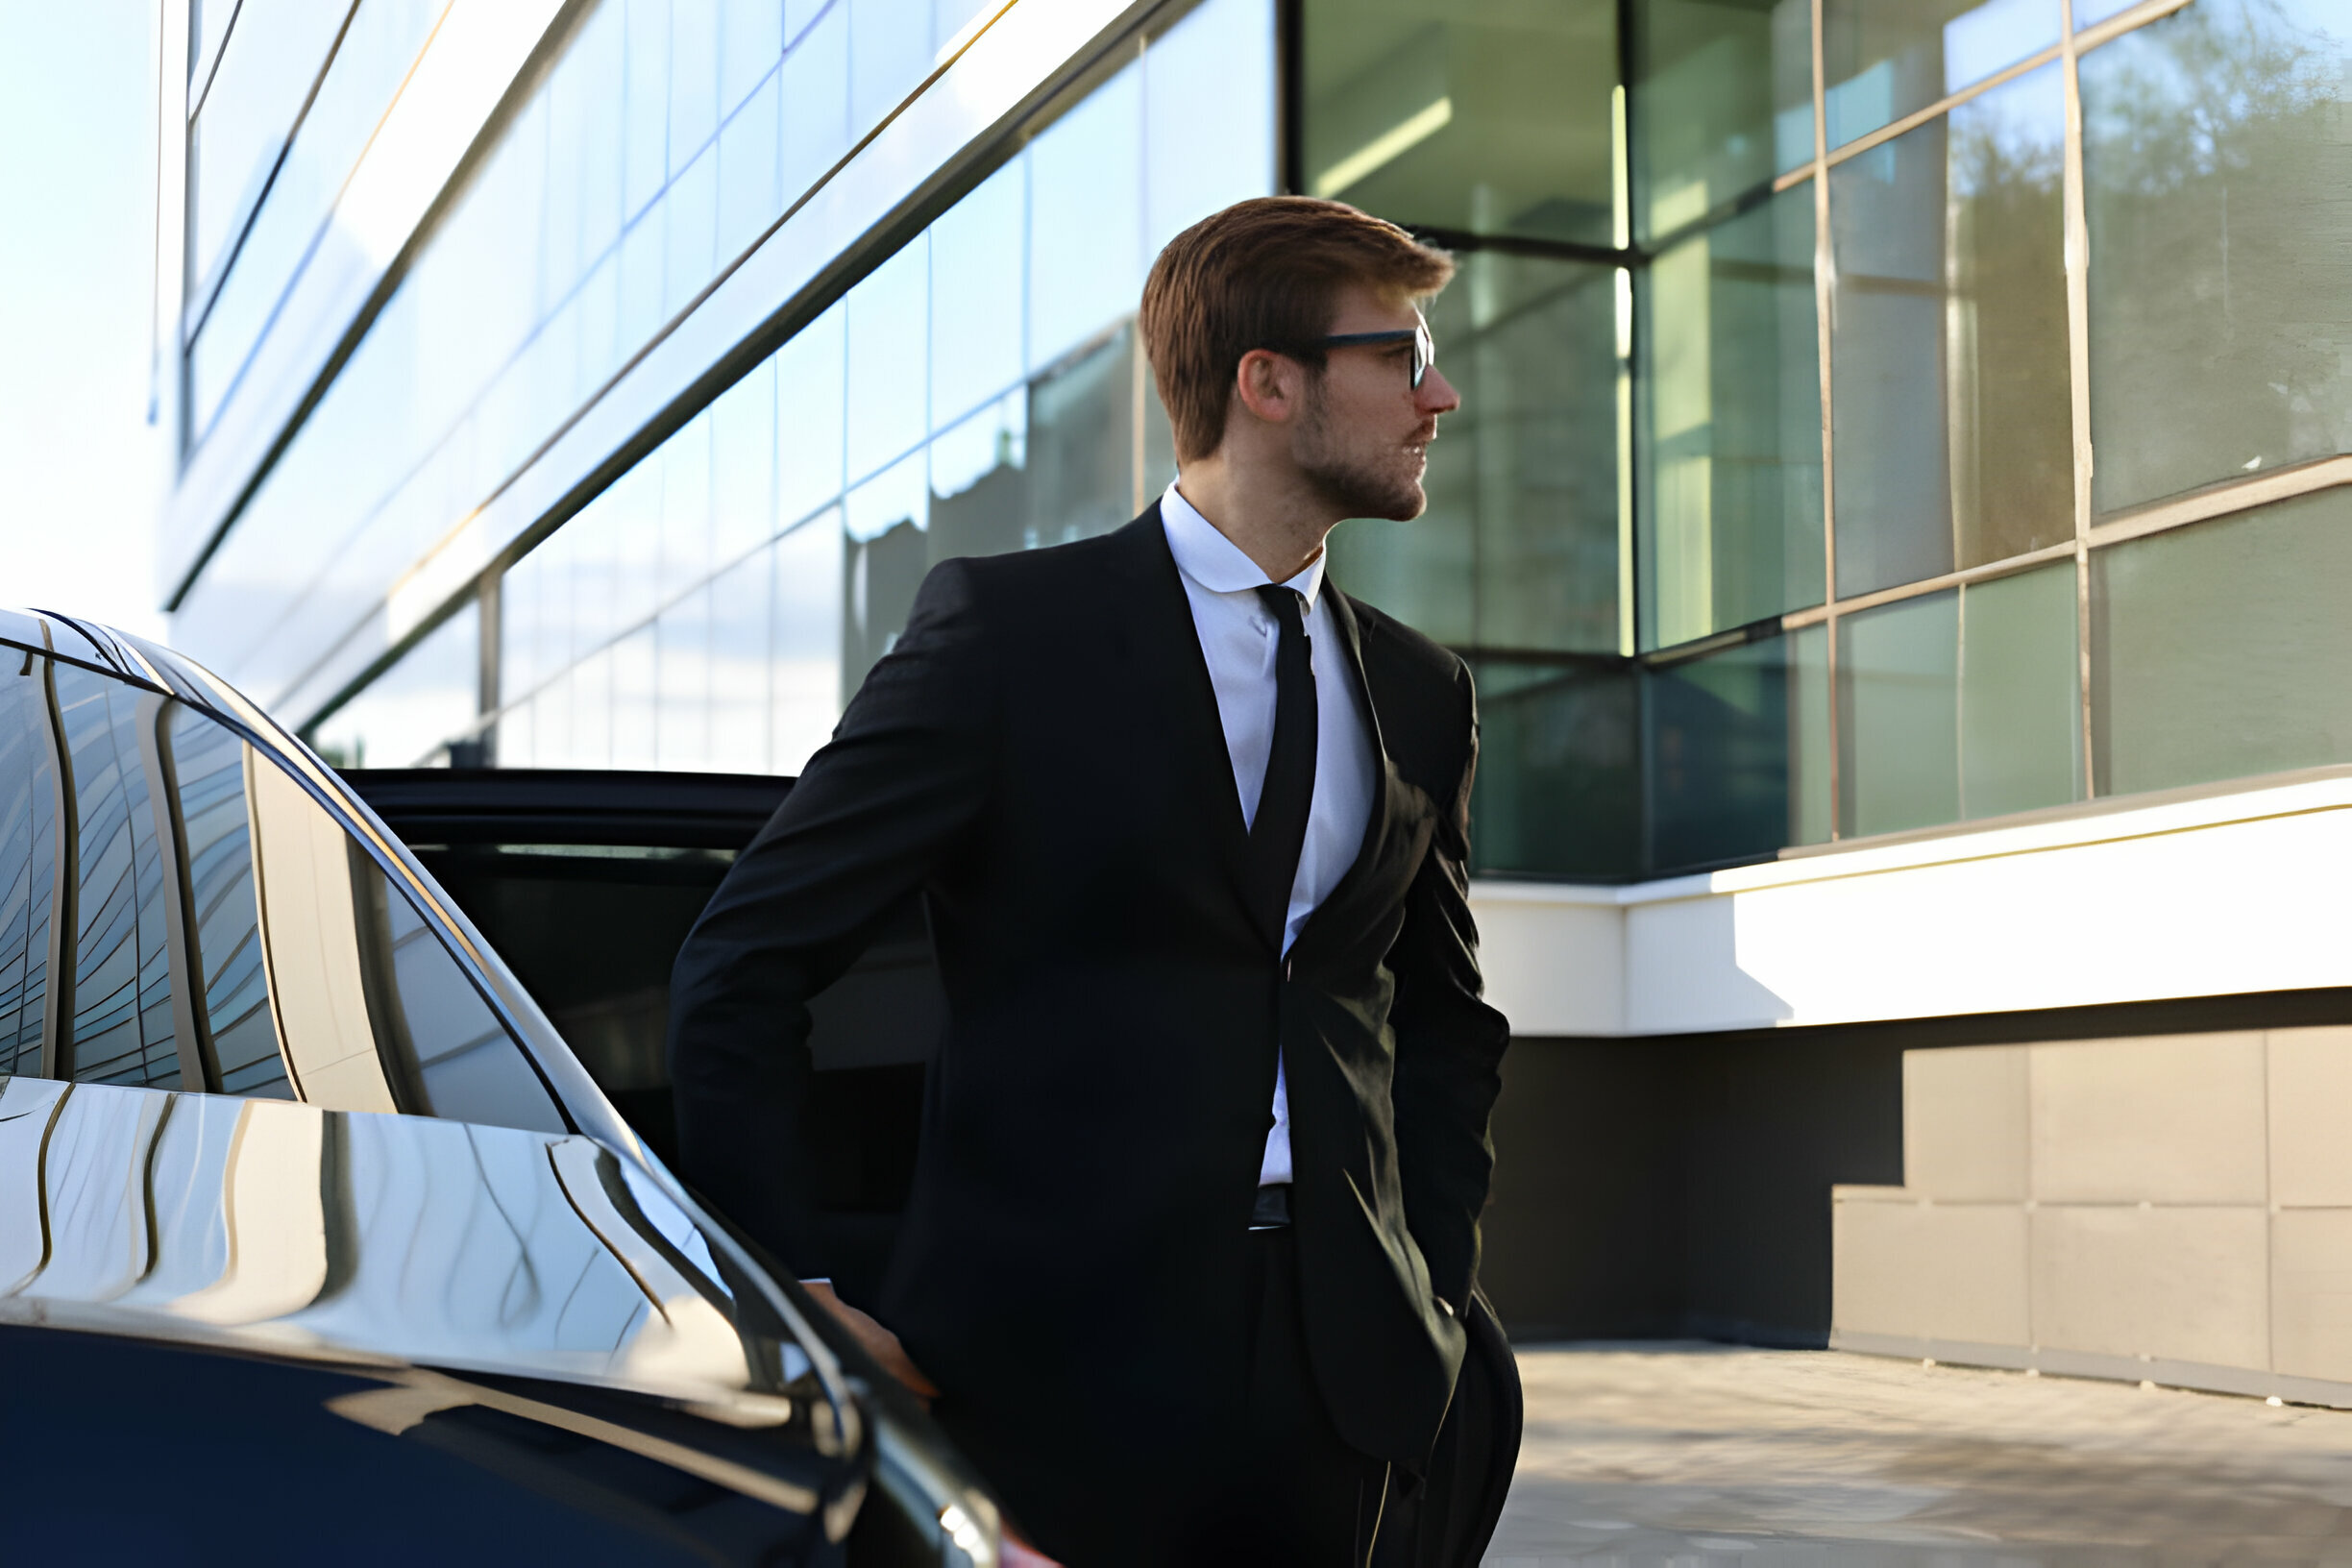  Chauffeur Driven Cars London - Hire For Group Travel